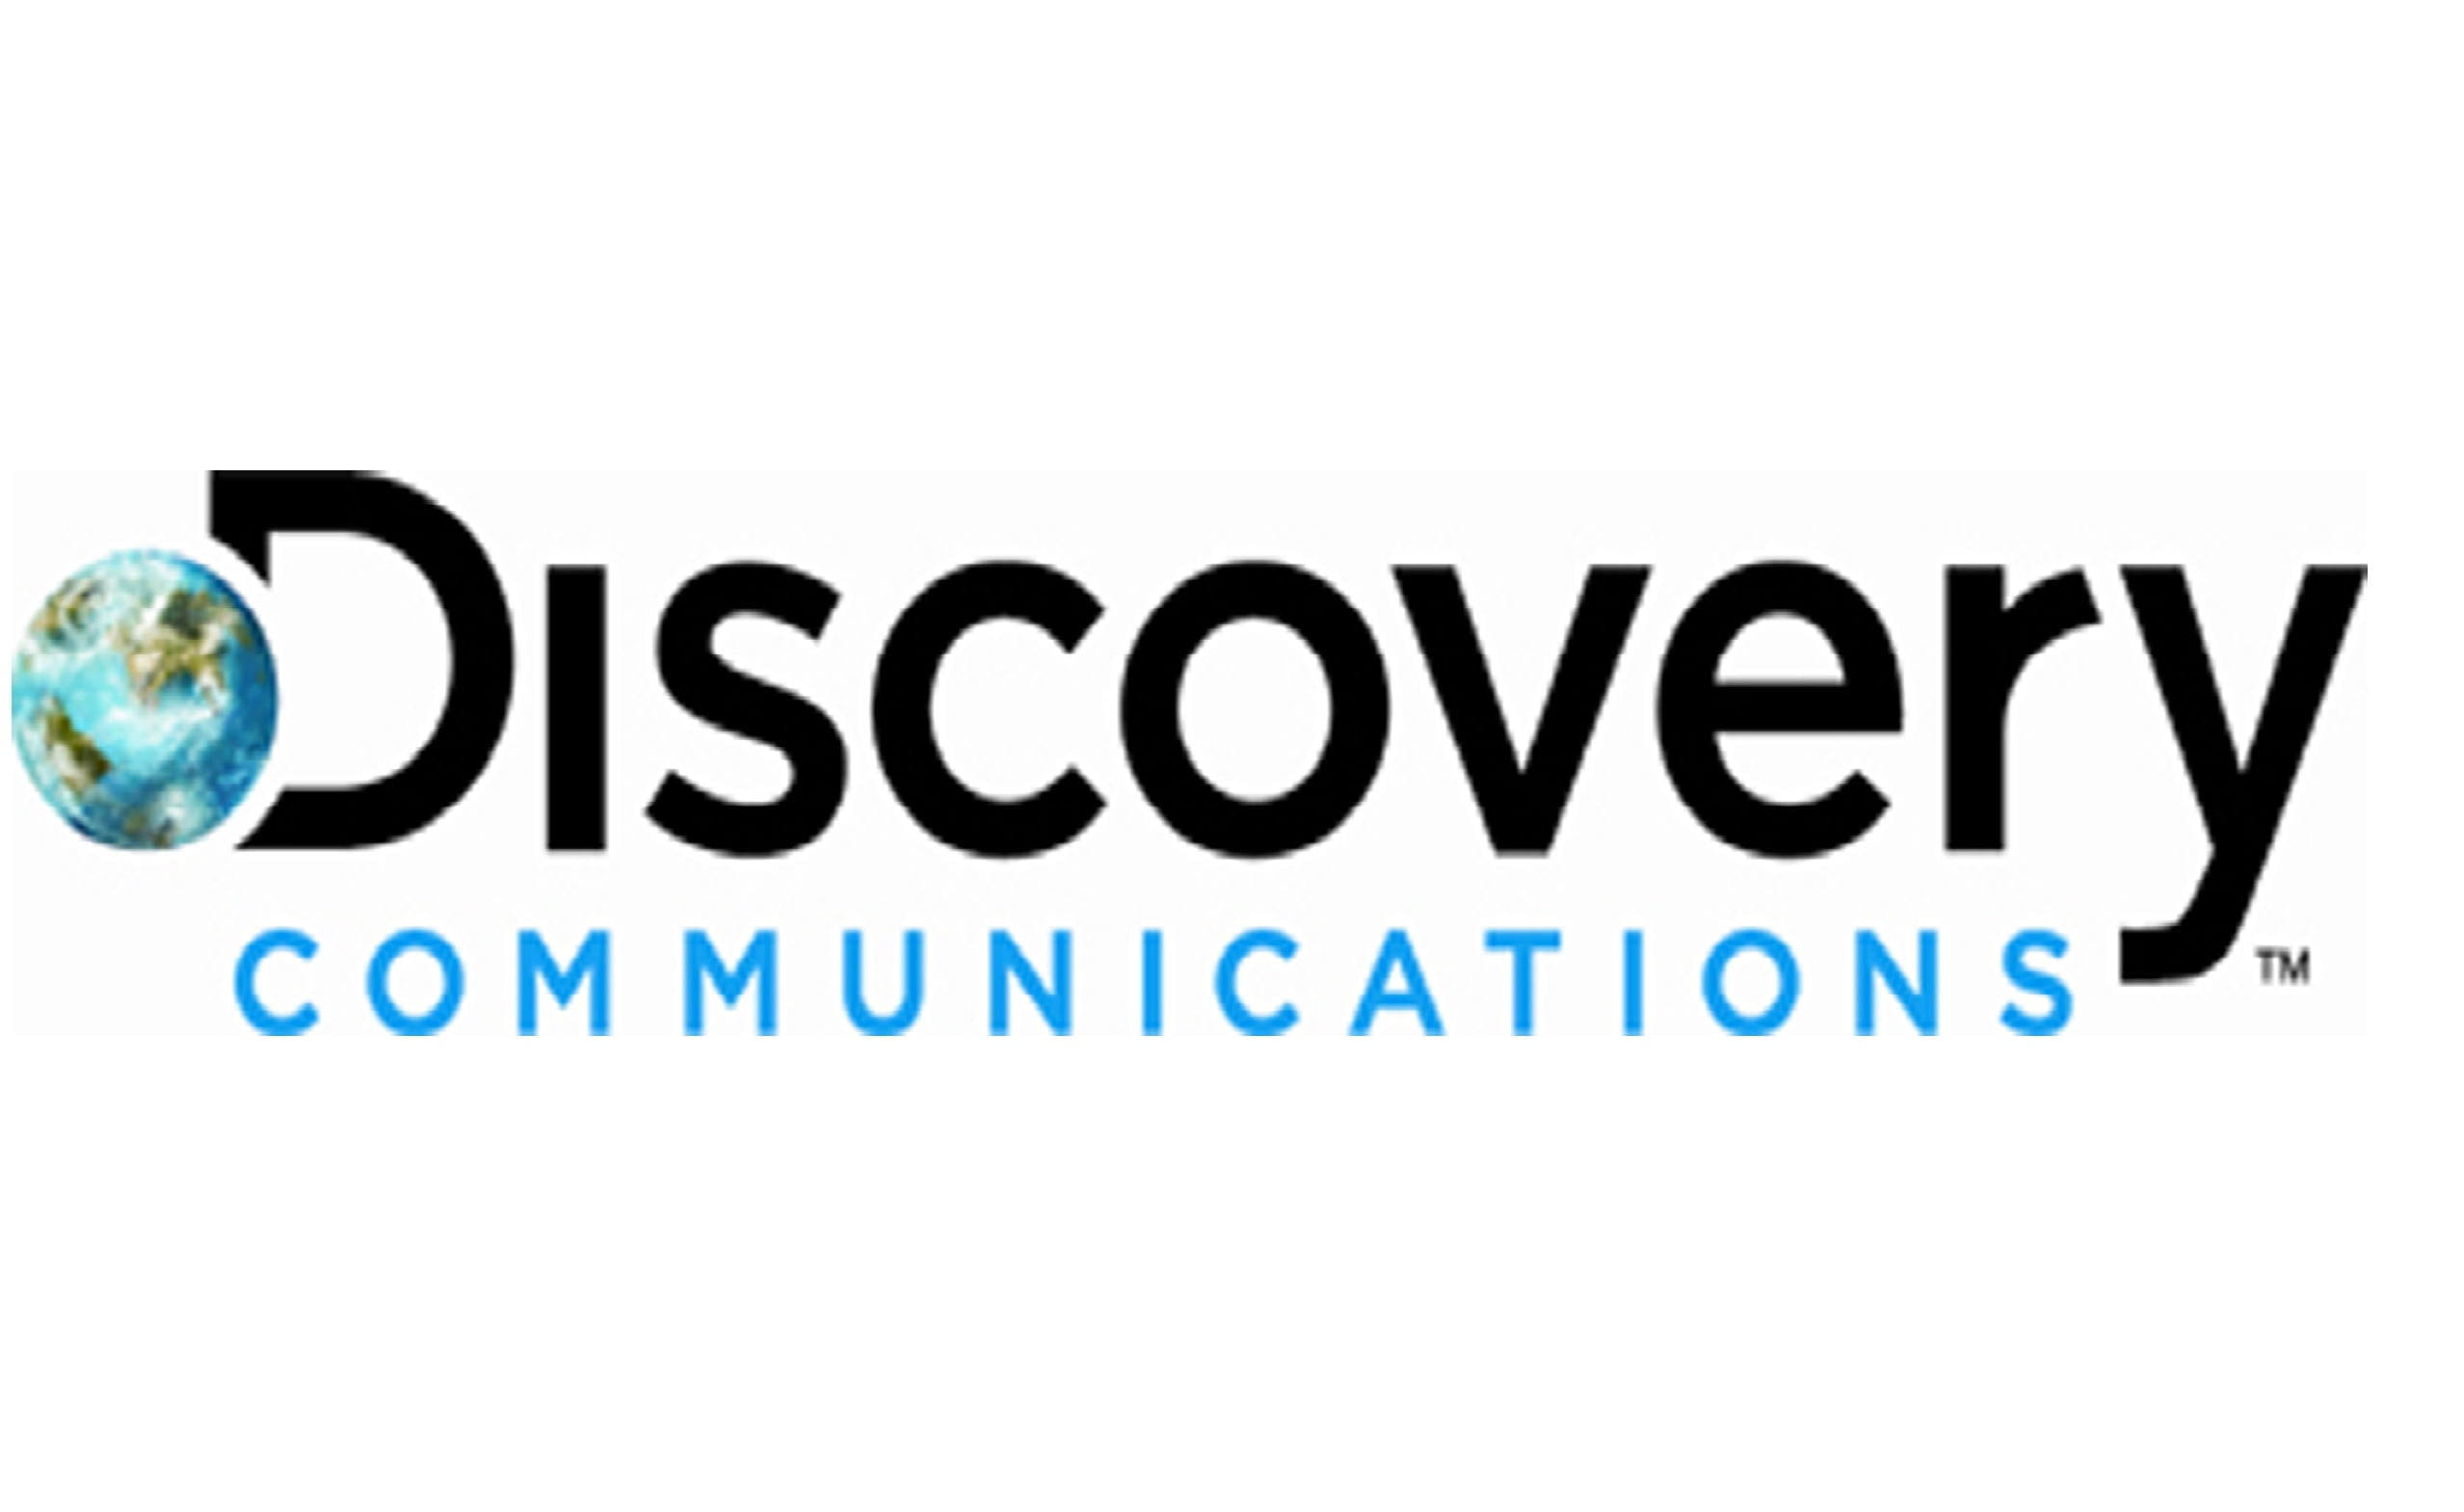 Discovery Communications Logo